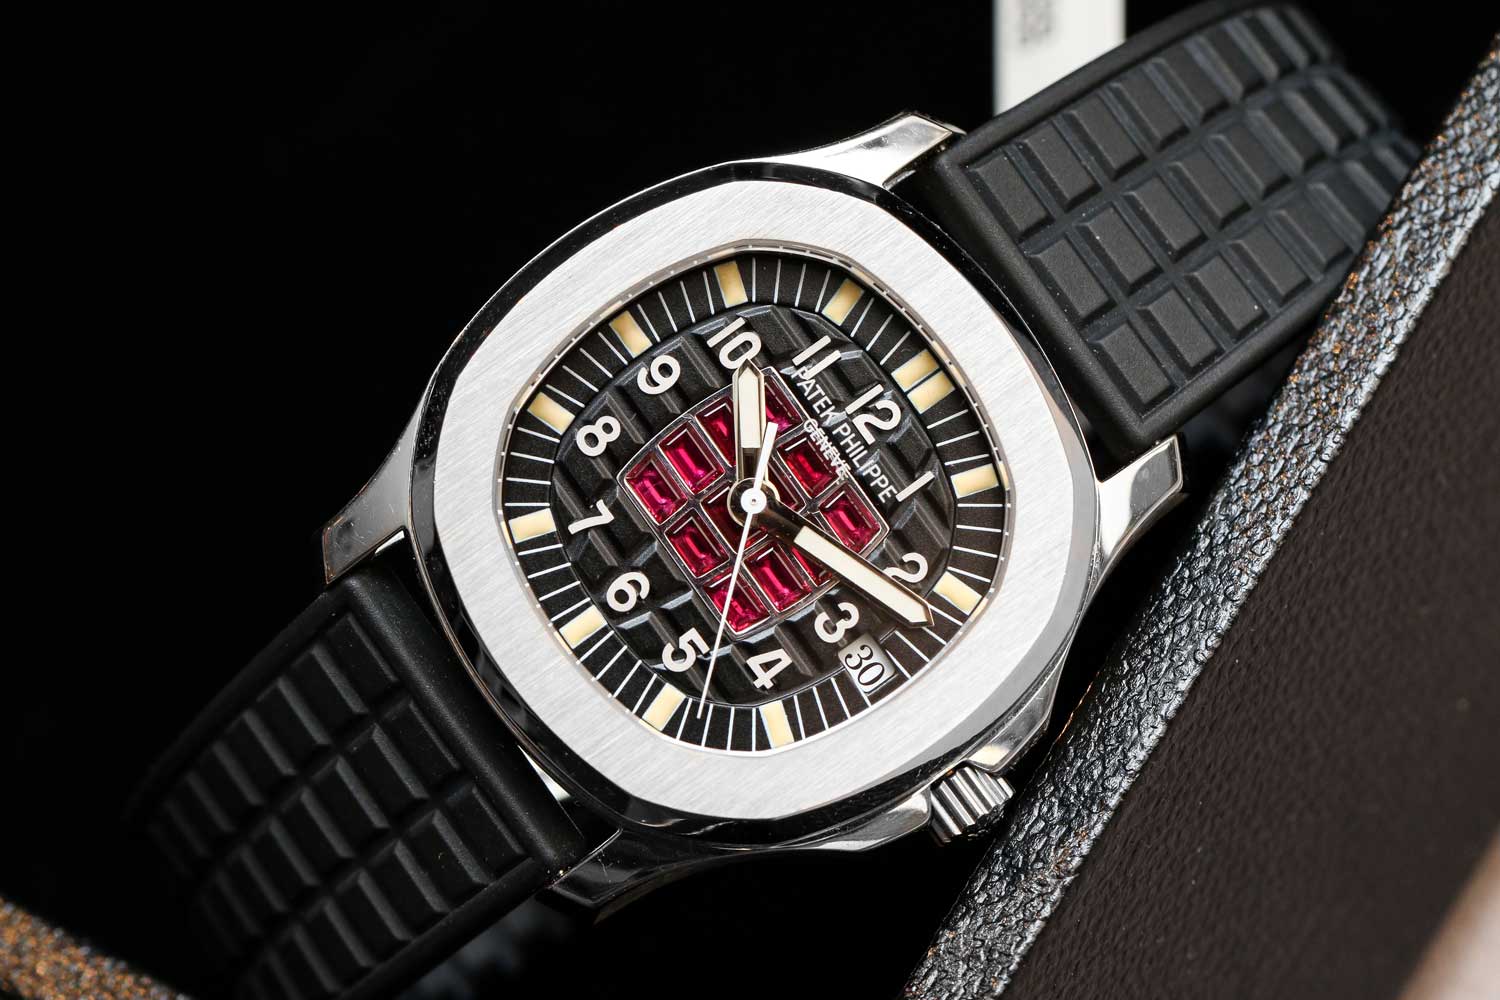 Unique white gold Aquanaut with 12 baguette shaped ruby set on the dial (©Revolution)